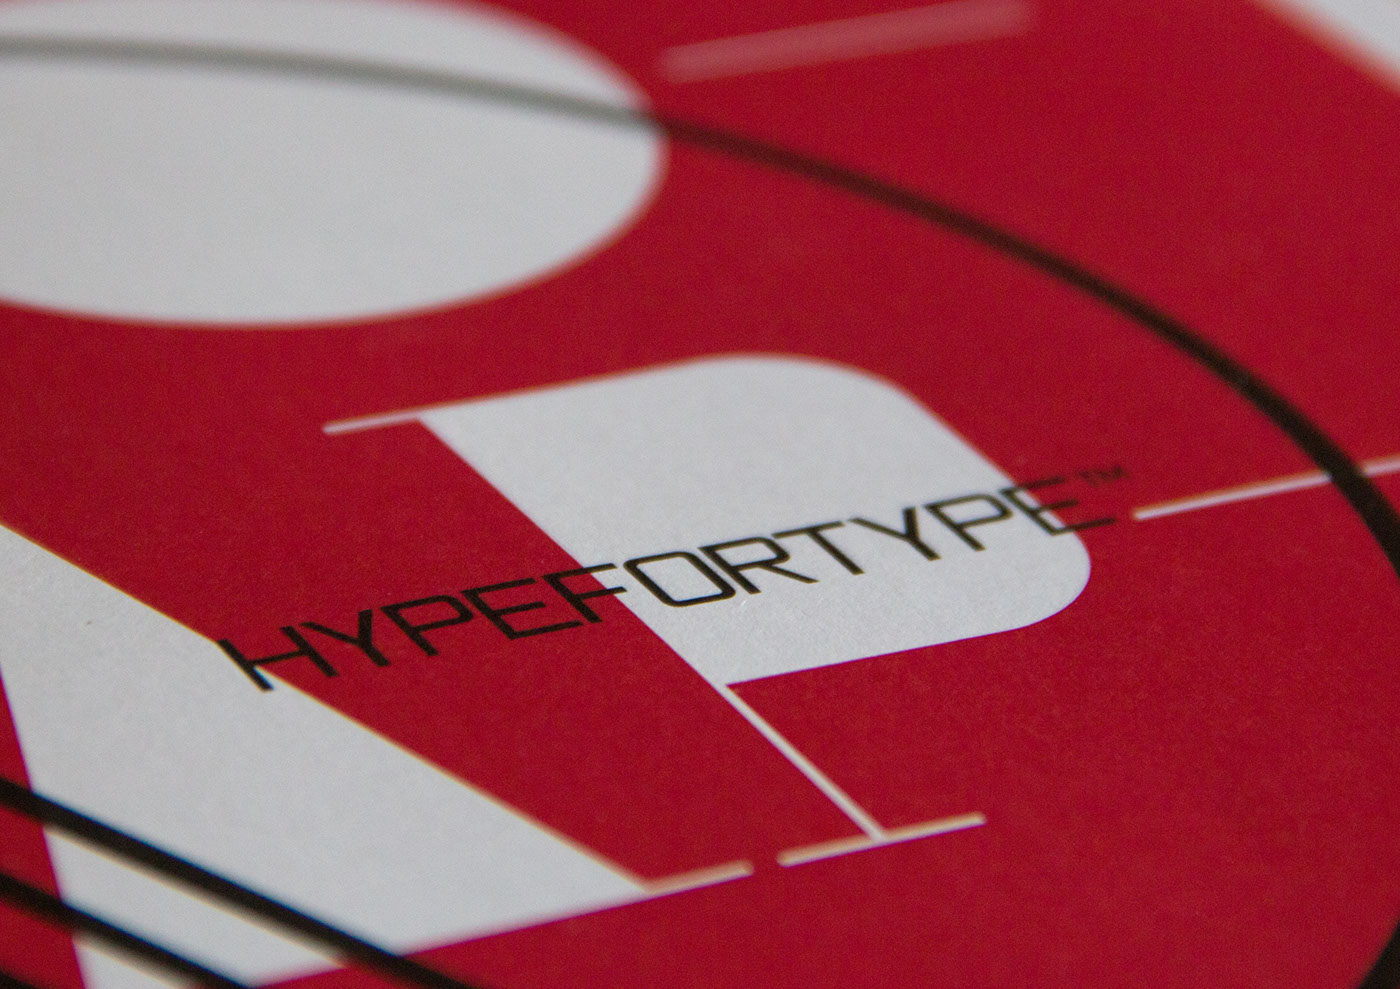 hypefortype non-format sawdust type design direct mailer Booklet Alex trochut posters red black White Neo Deco New Modern Otto Typographic Revolt revolution type print folded poster sexy grid grids